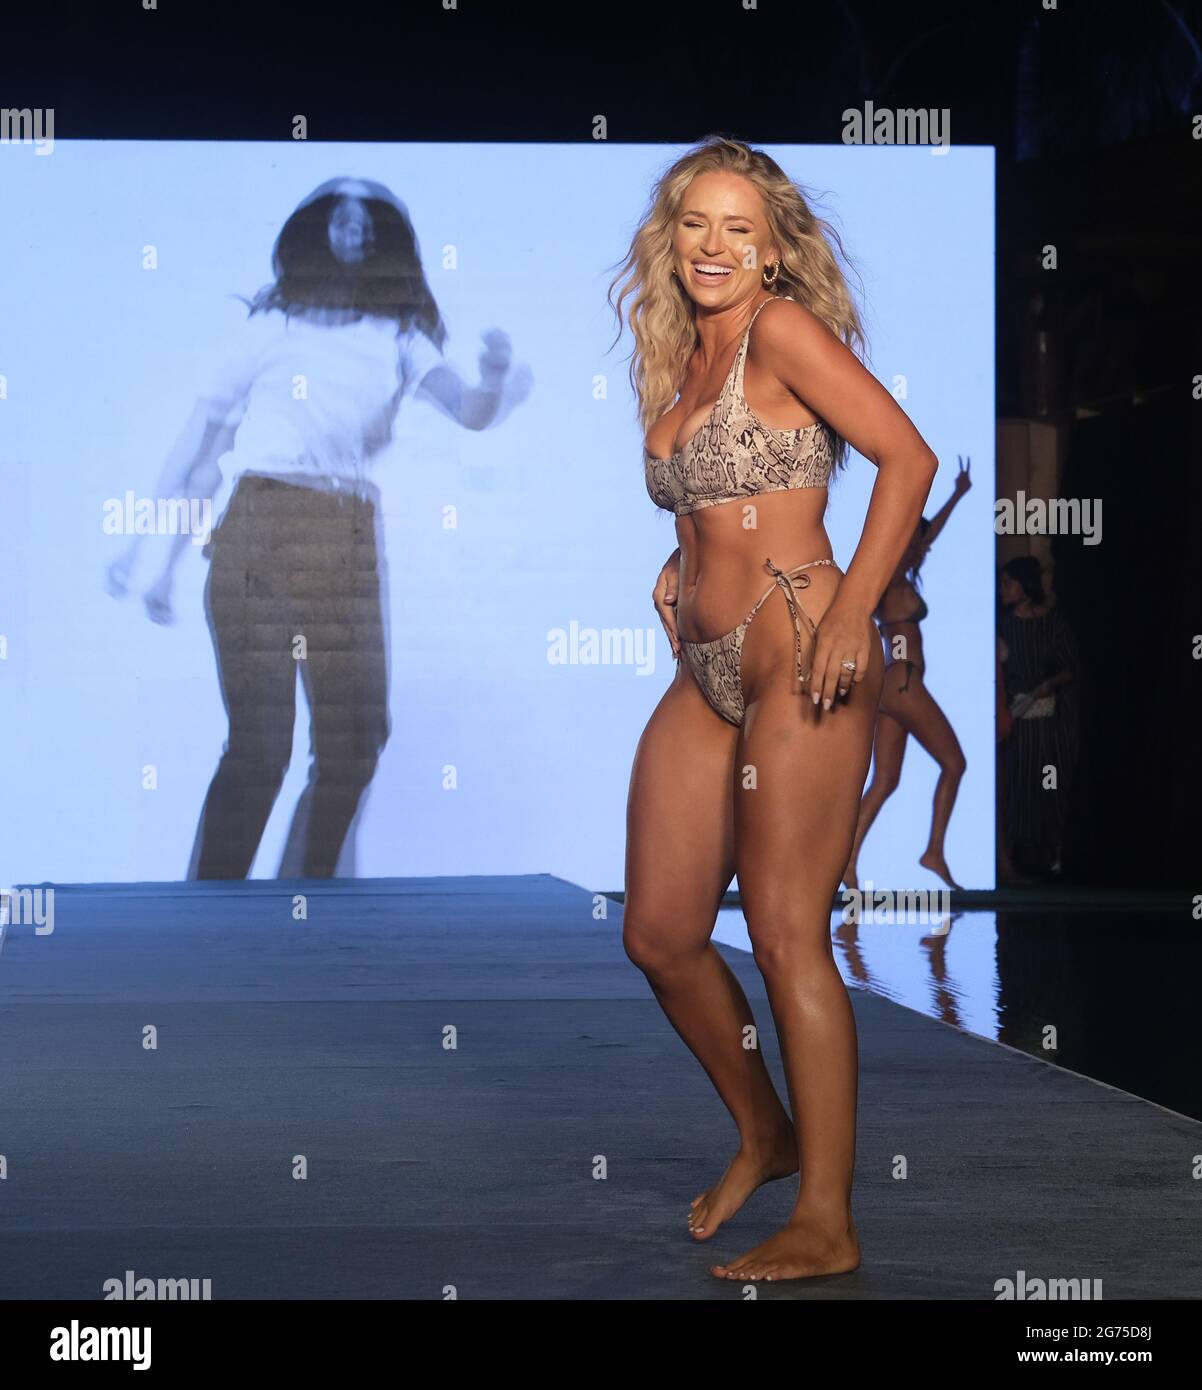 SI Swim Search finalist Kristen Louelle Gaffney, mom of two, unveils curves  on Miami runway: 'Magical moment